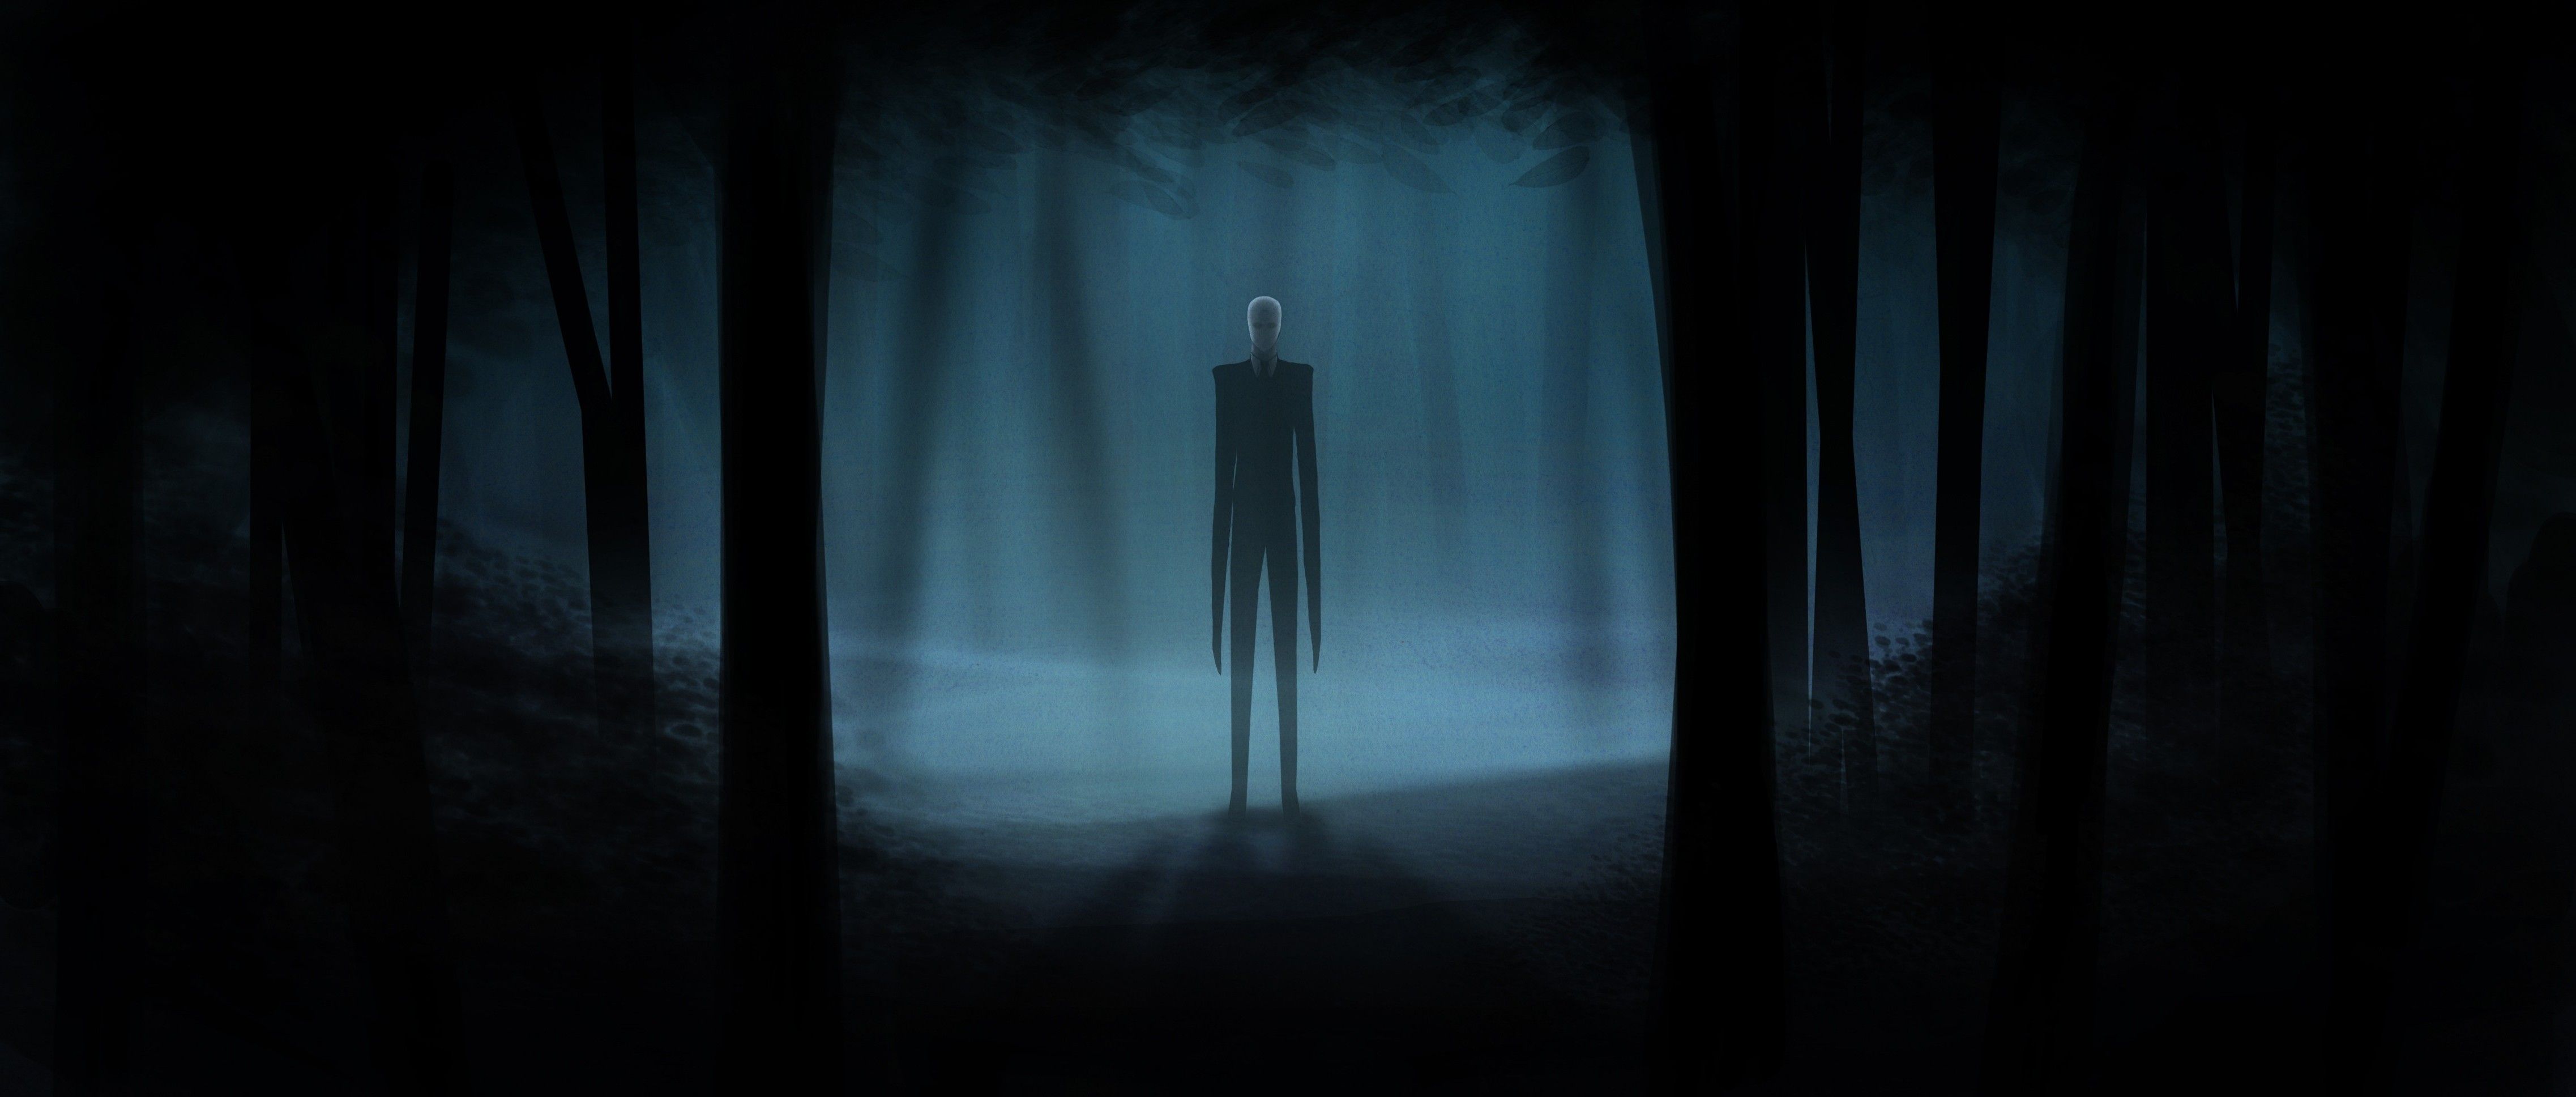 download slenderman xbox for free